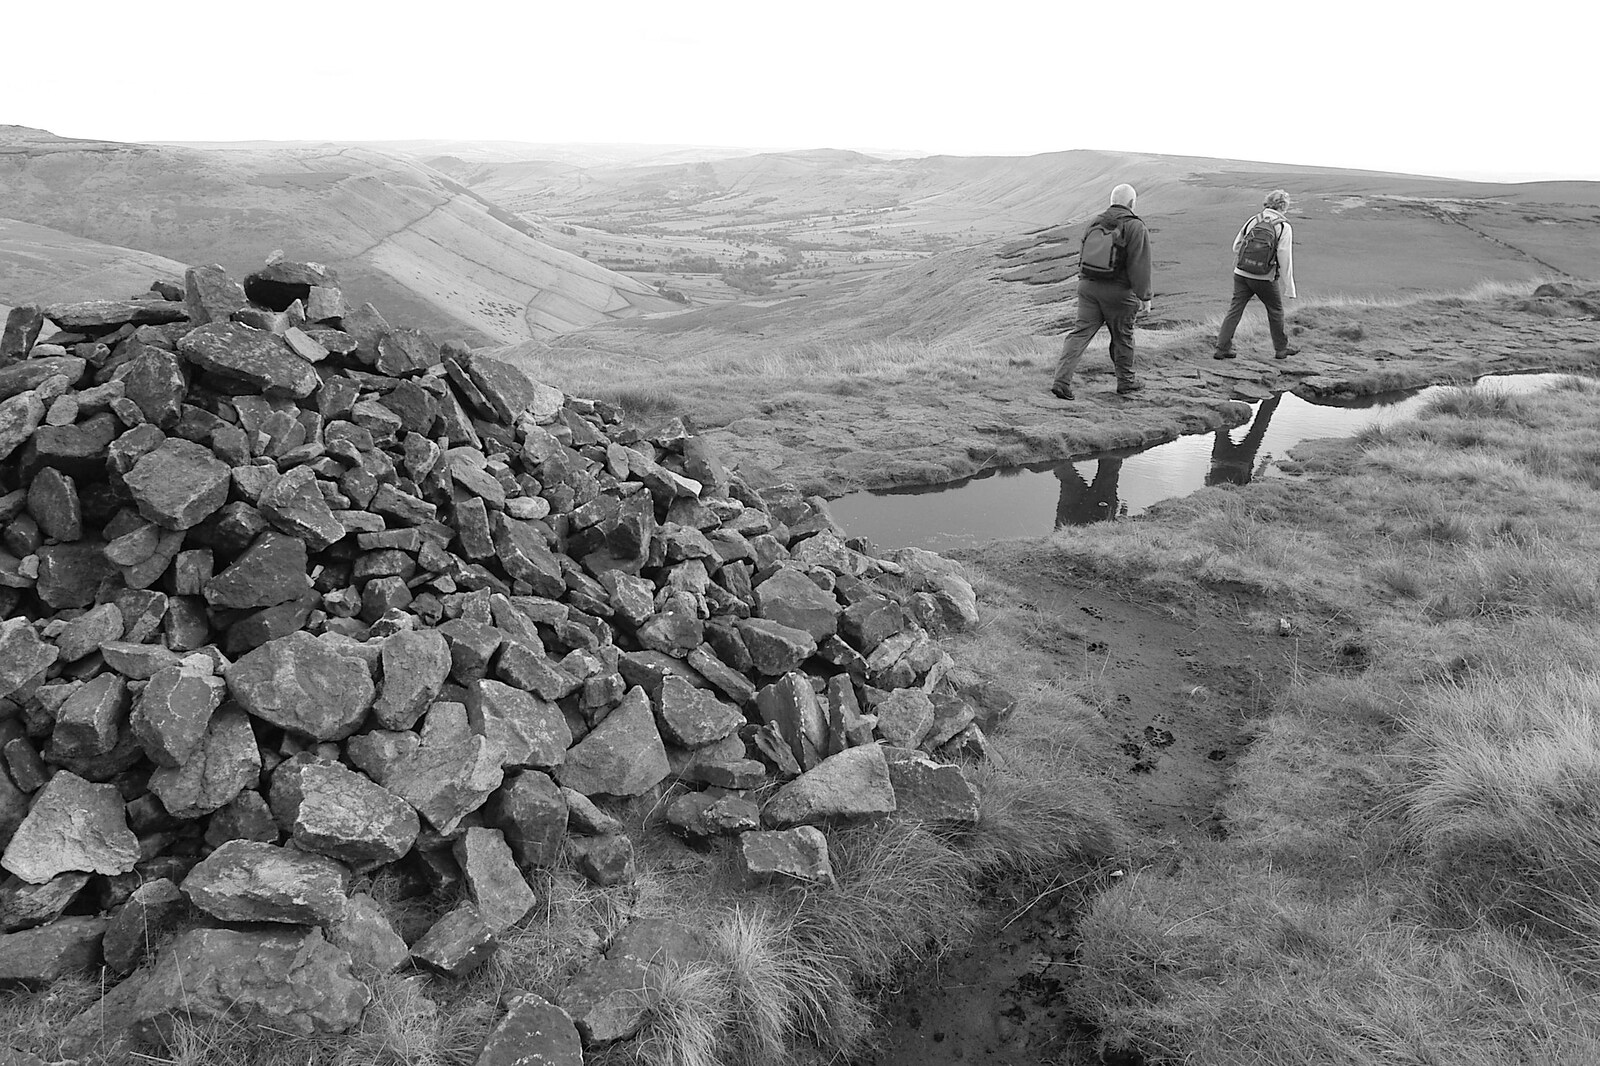 The Pennine Way: Lost on Kinder Scout, Derbyshire - 9th October 2005: A pile of stones near Kinder Low